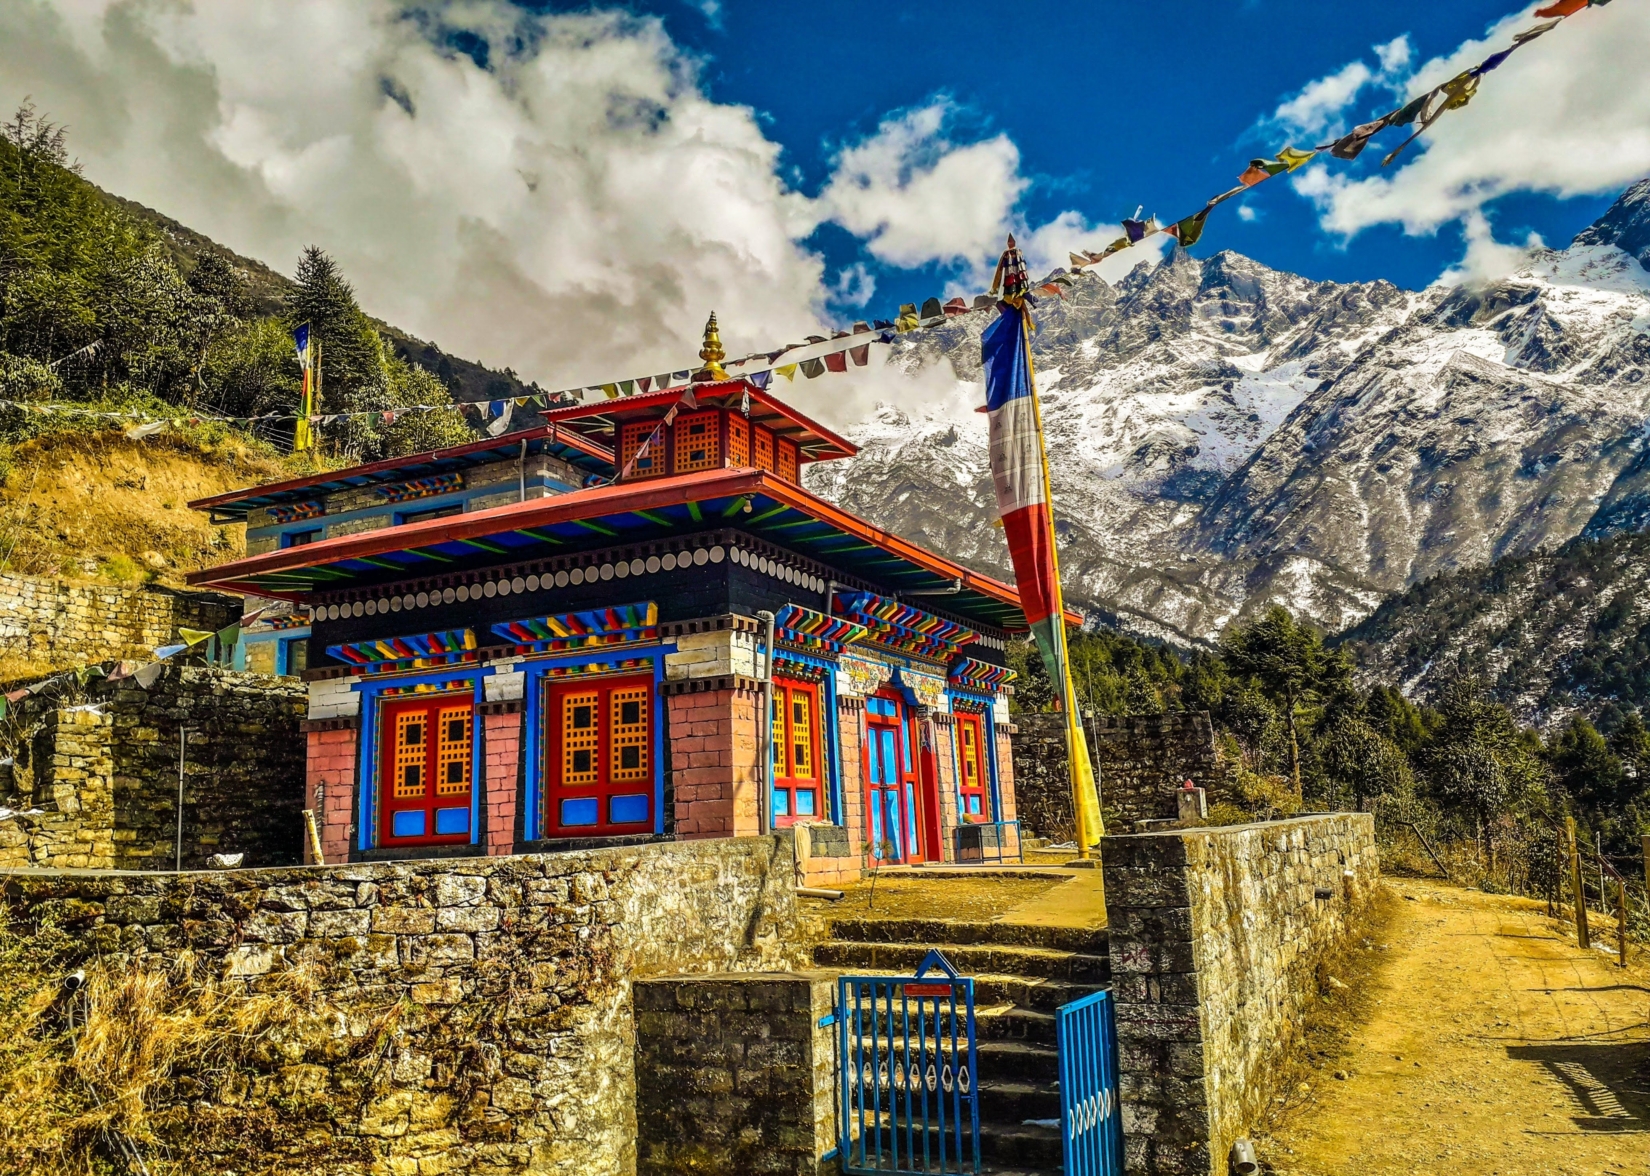 Colorful building in Nepal with mountains in background